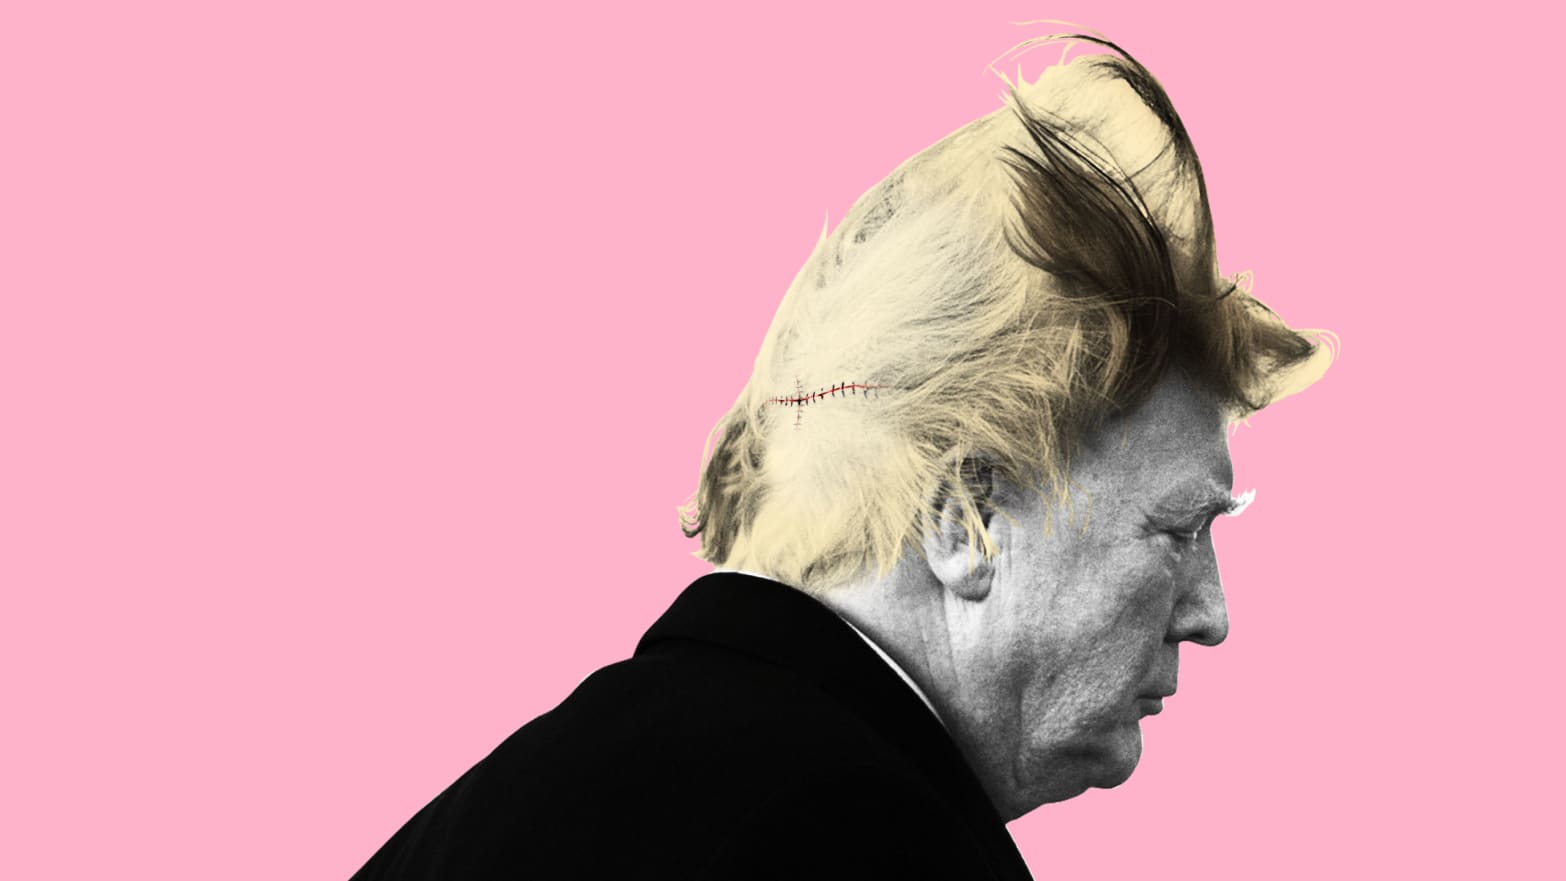 Plastic Surgeons Try to Solve Trump's Hair Mystery